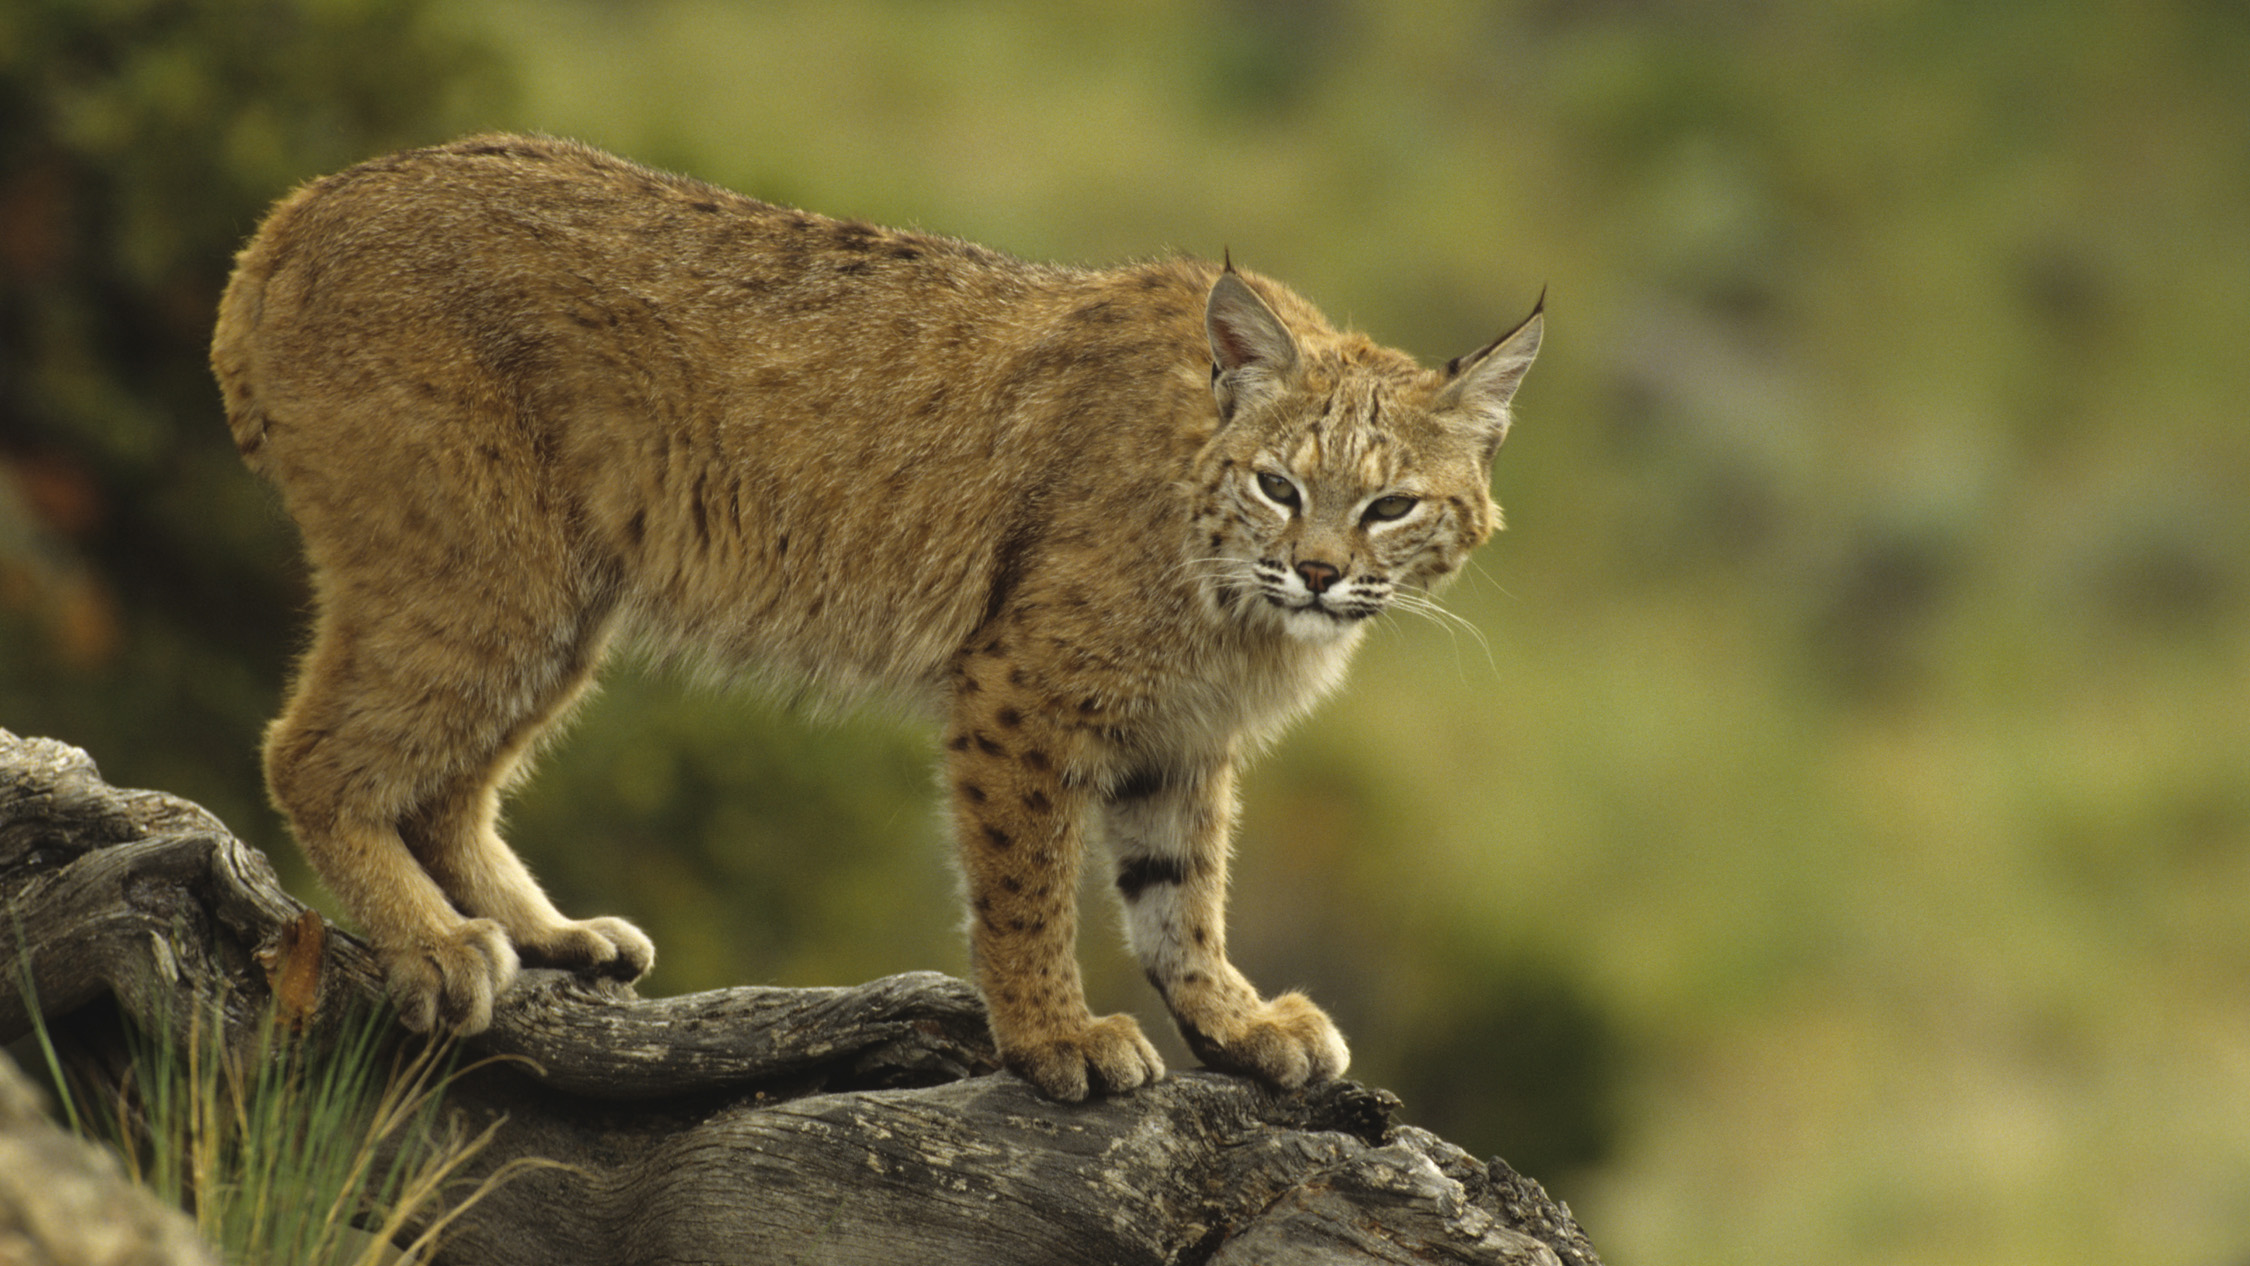 Sightings are rare, but the San Gabriel Mountains are excellent bobcat habitat.